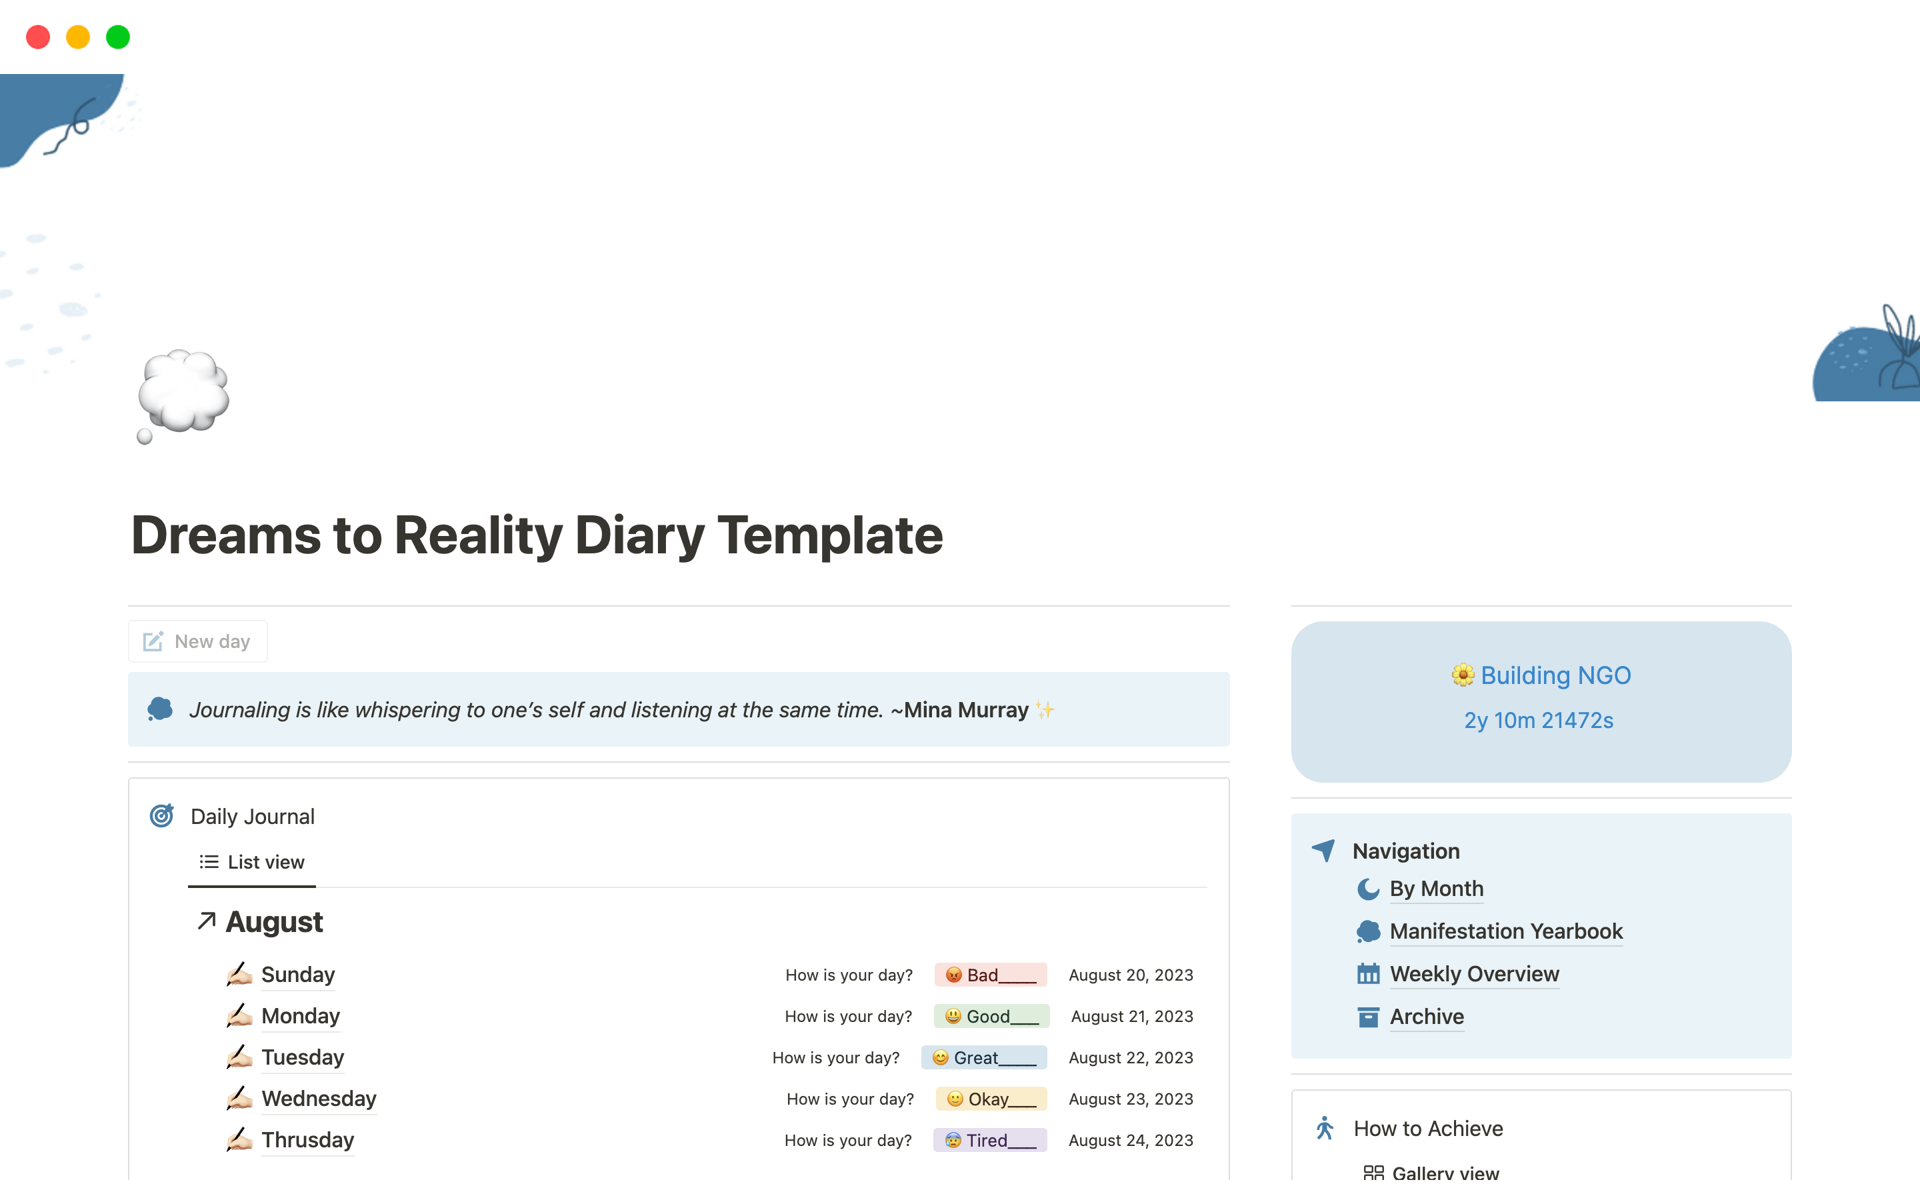 Introducing the "Dreams to Reality Diary Template" – your ultimate companion on the journey from aspirations to achievements.